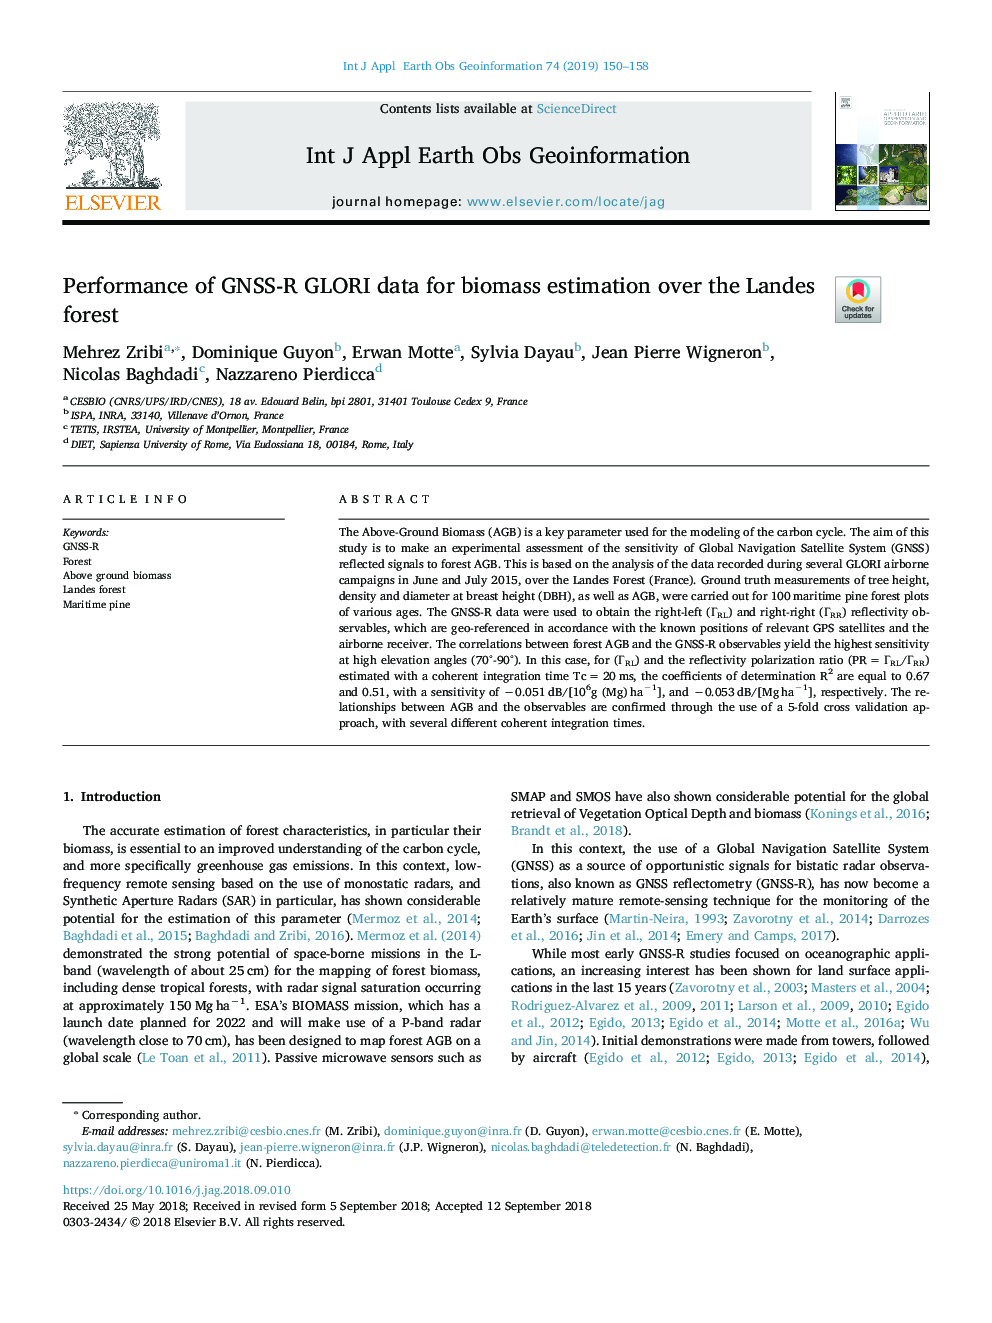 Performance of GNSS-R GLORI data for biomass estimation over the Landes forest